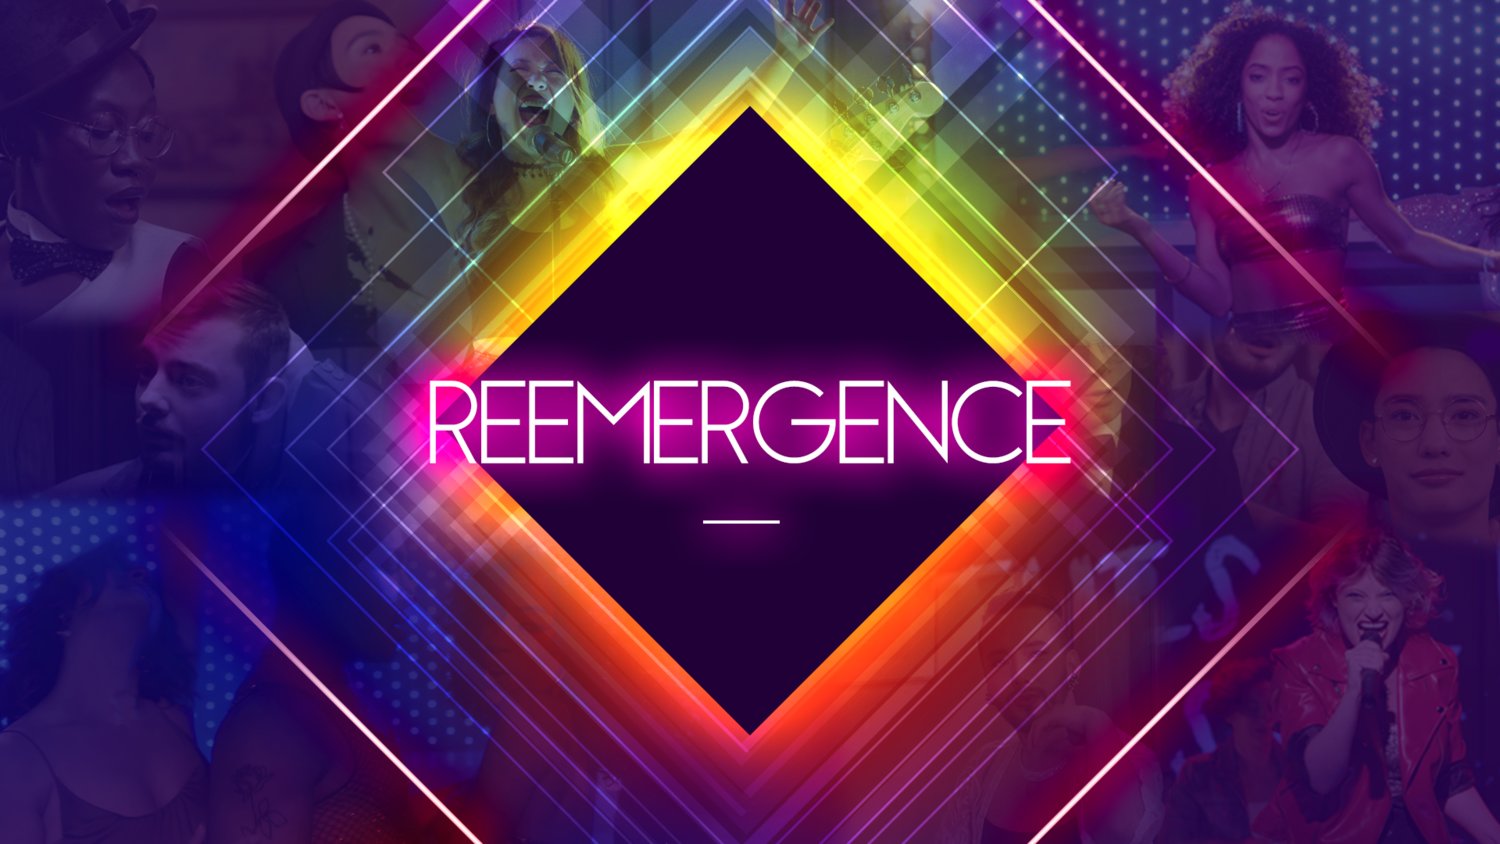 “Reemergence” features five music videos that act as separate chapters.